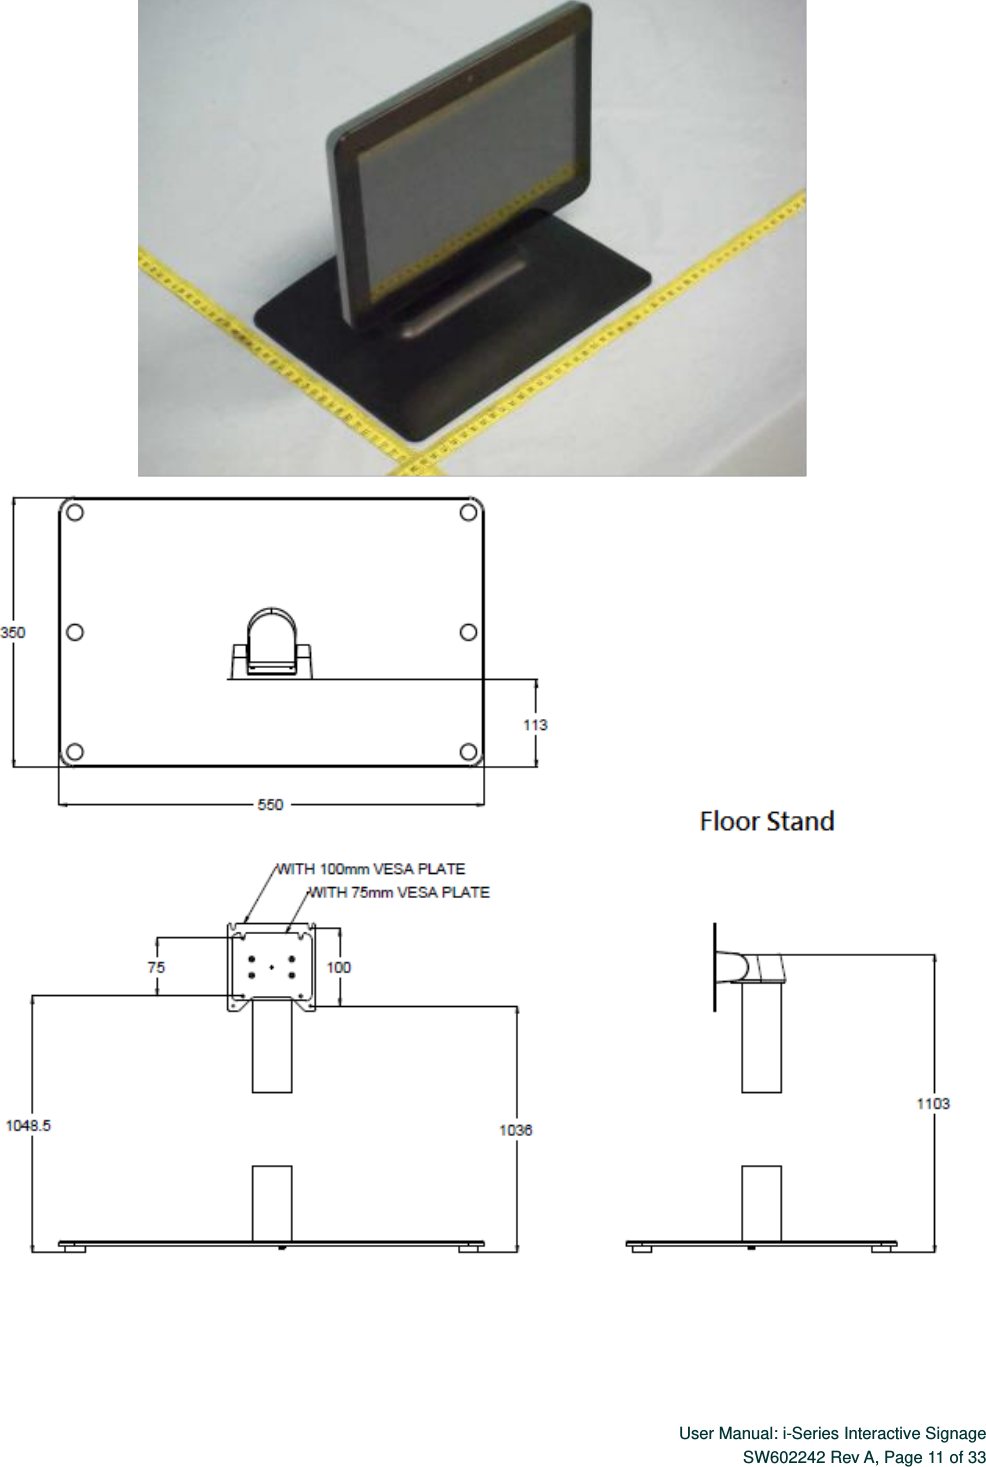  User Manual: i-Series Interactive Signage SW602242 Rev A, Page 11 of 33     